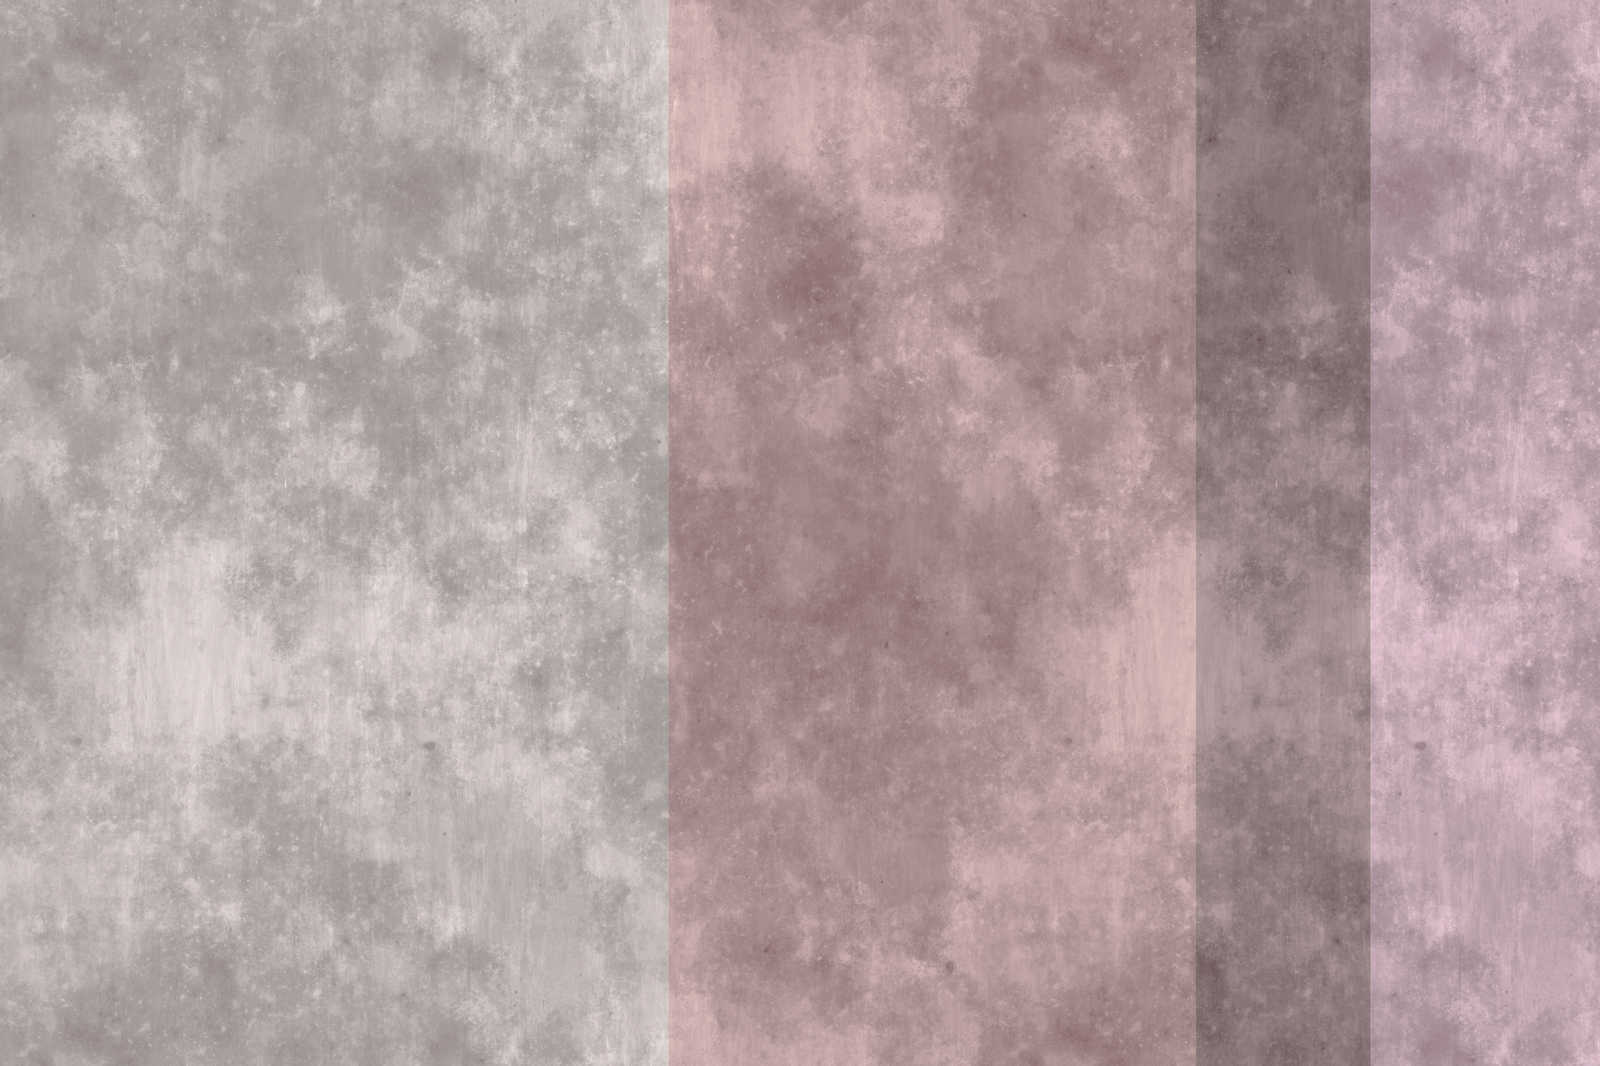             Concrete-look canvas picture with stripes | grey, pink - 0.90 m x 0.60 m
        